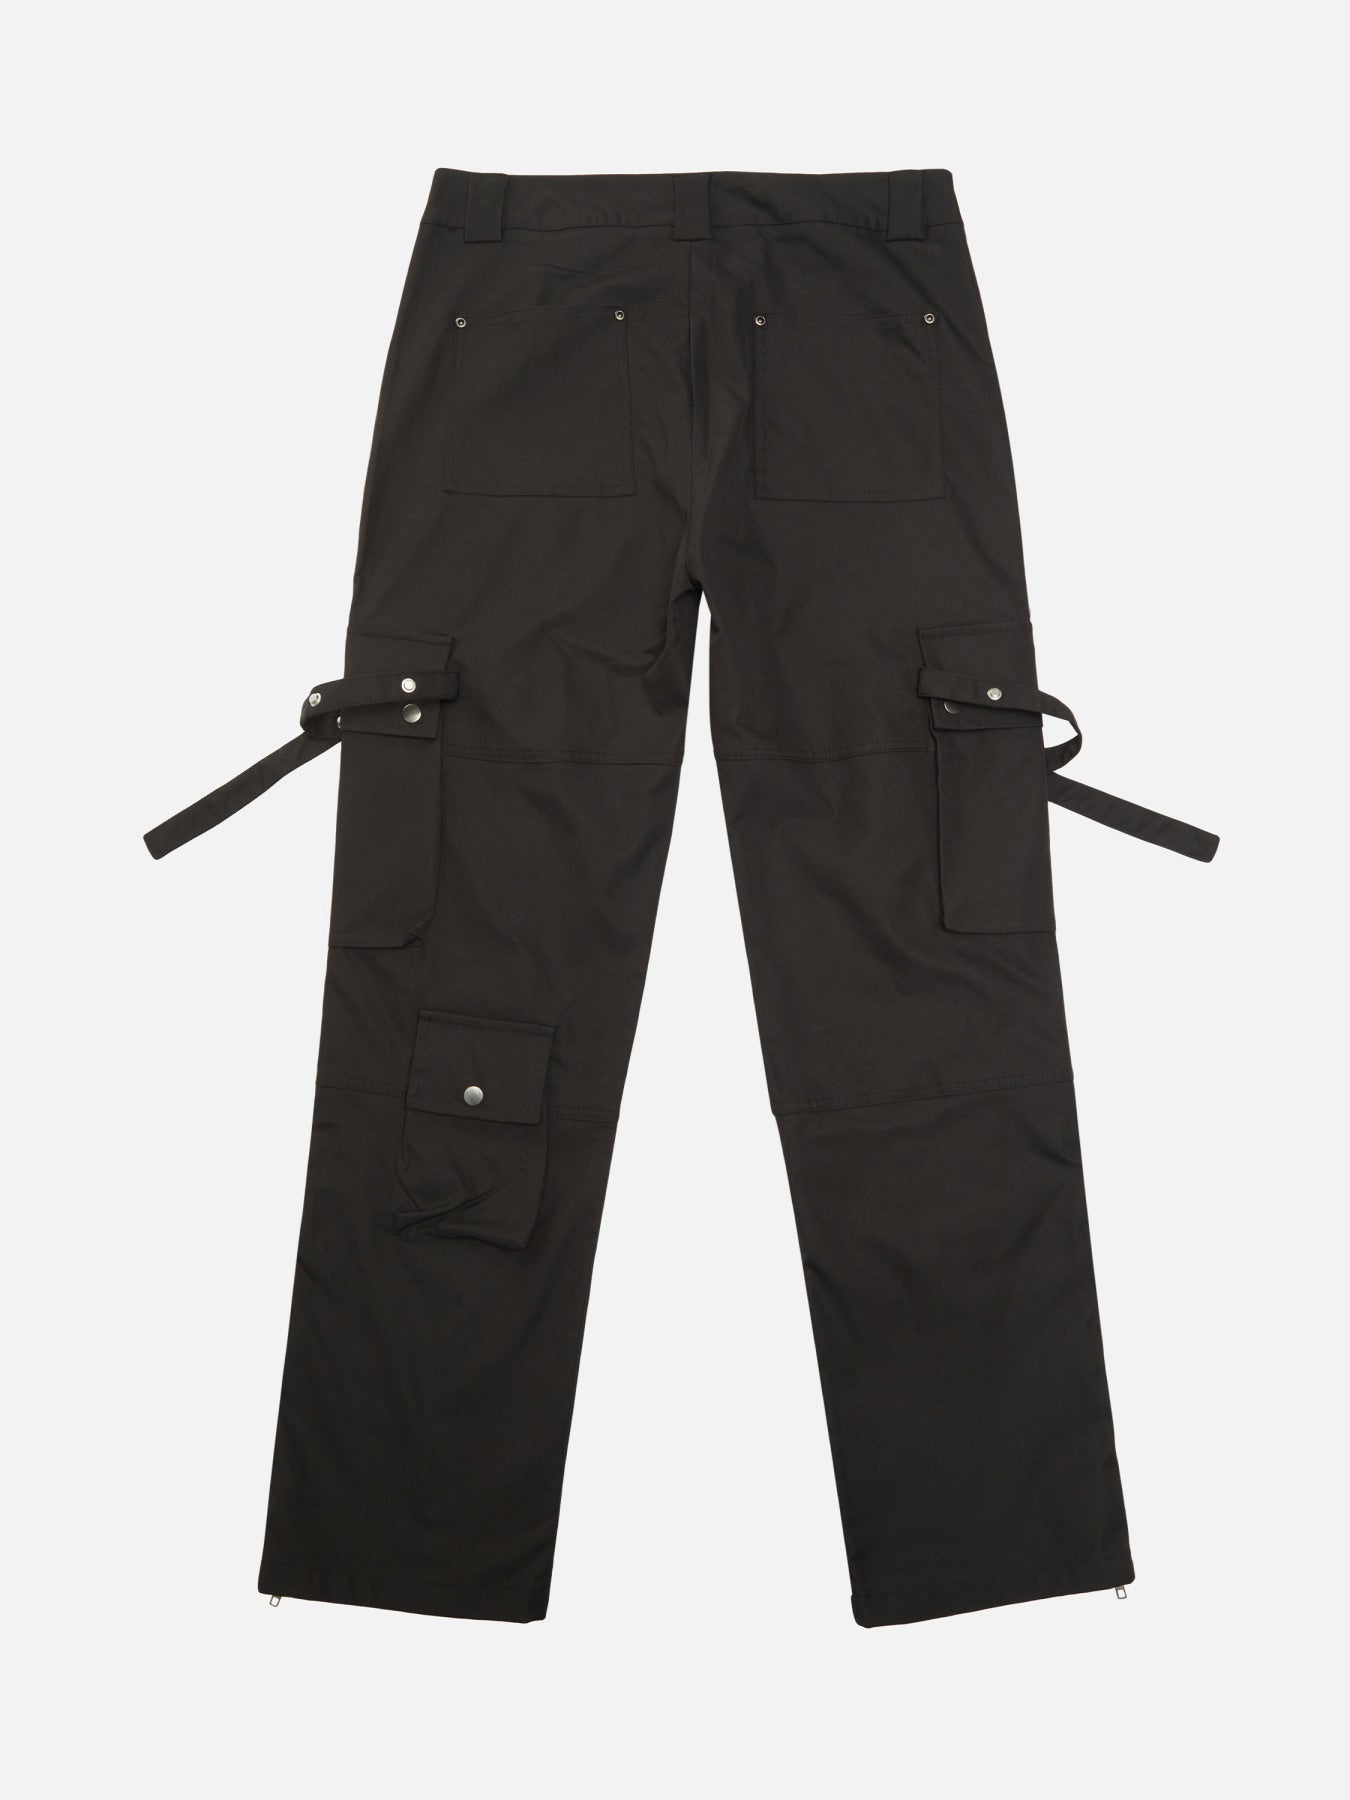 Thesupermade Multi-pocket Cargo Pants